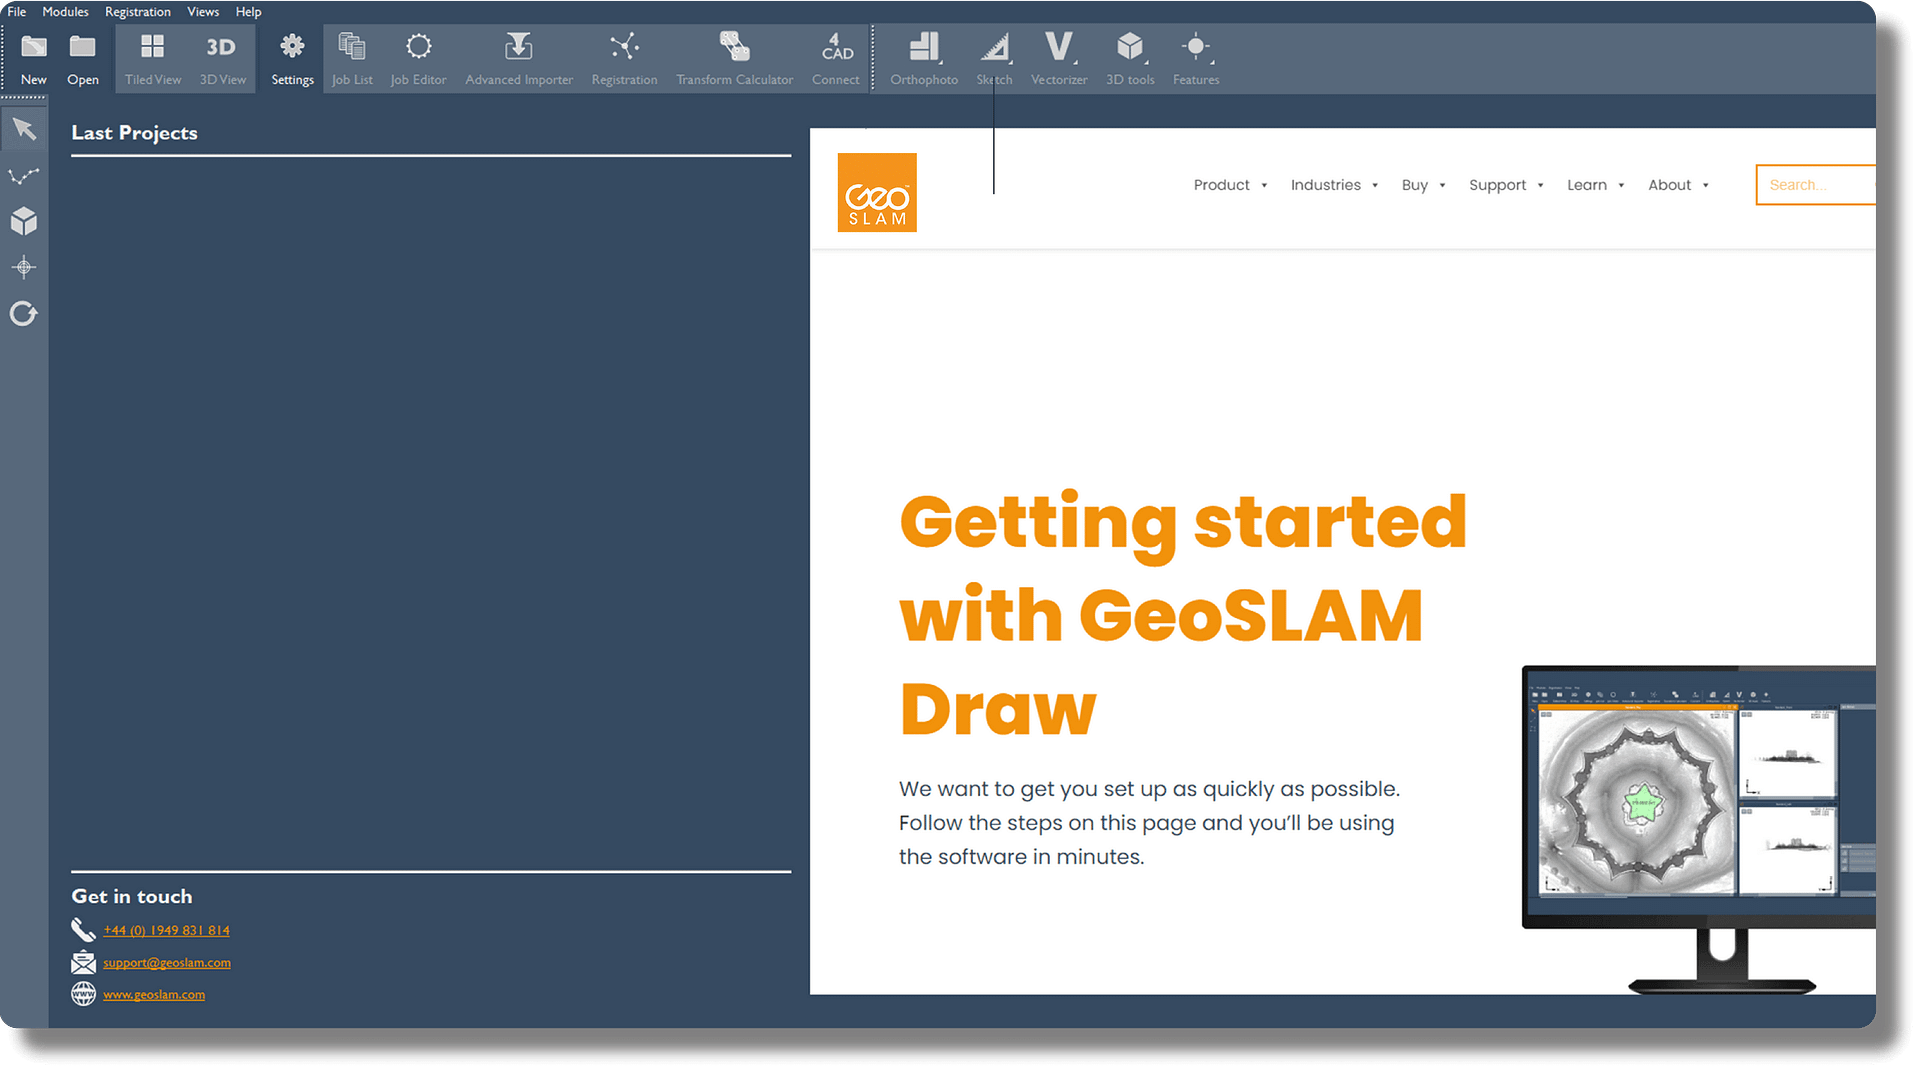 GeoSLAM Draw home page